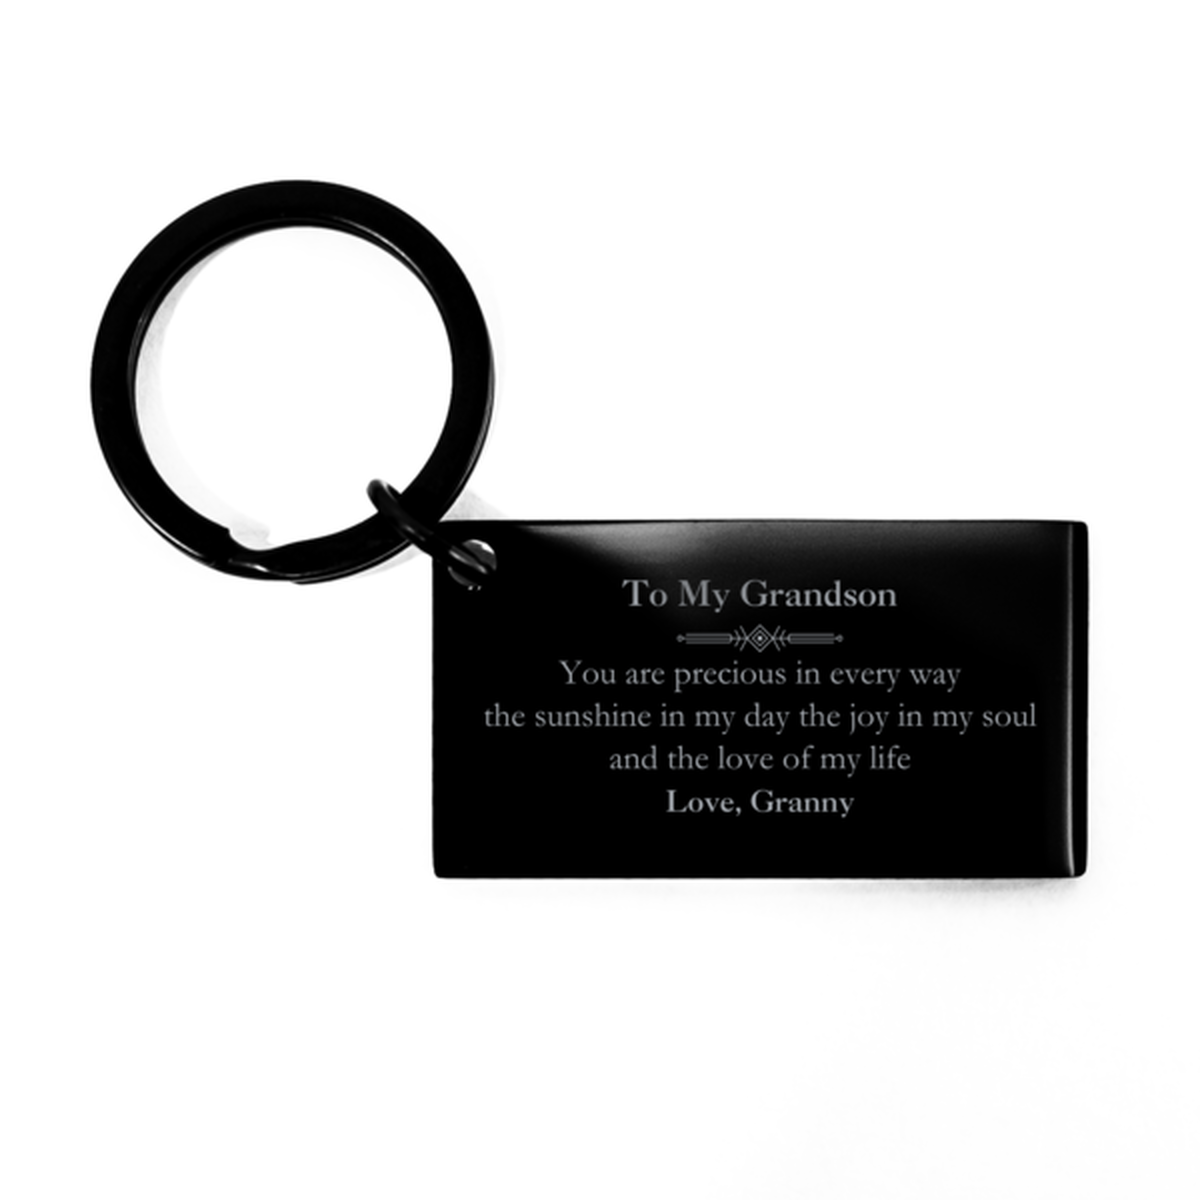 Graduation Gifts for Grandson Keychain Present from Granny, Christmas Grandson Birthday Gifts Grandson You are precious in every way the sunshine in my day. Love, Granny